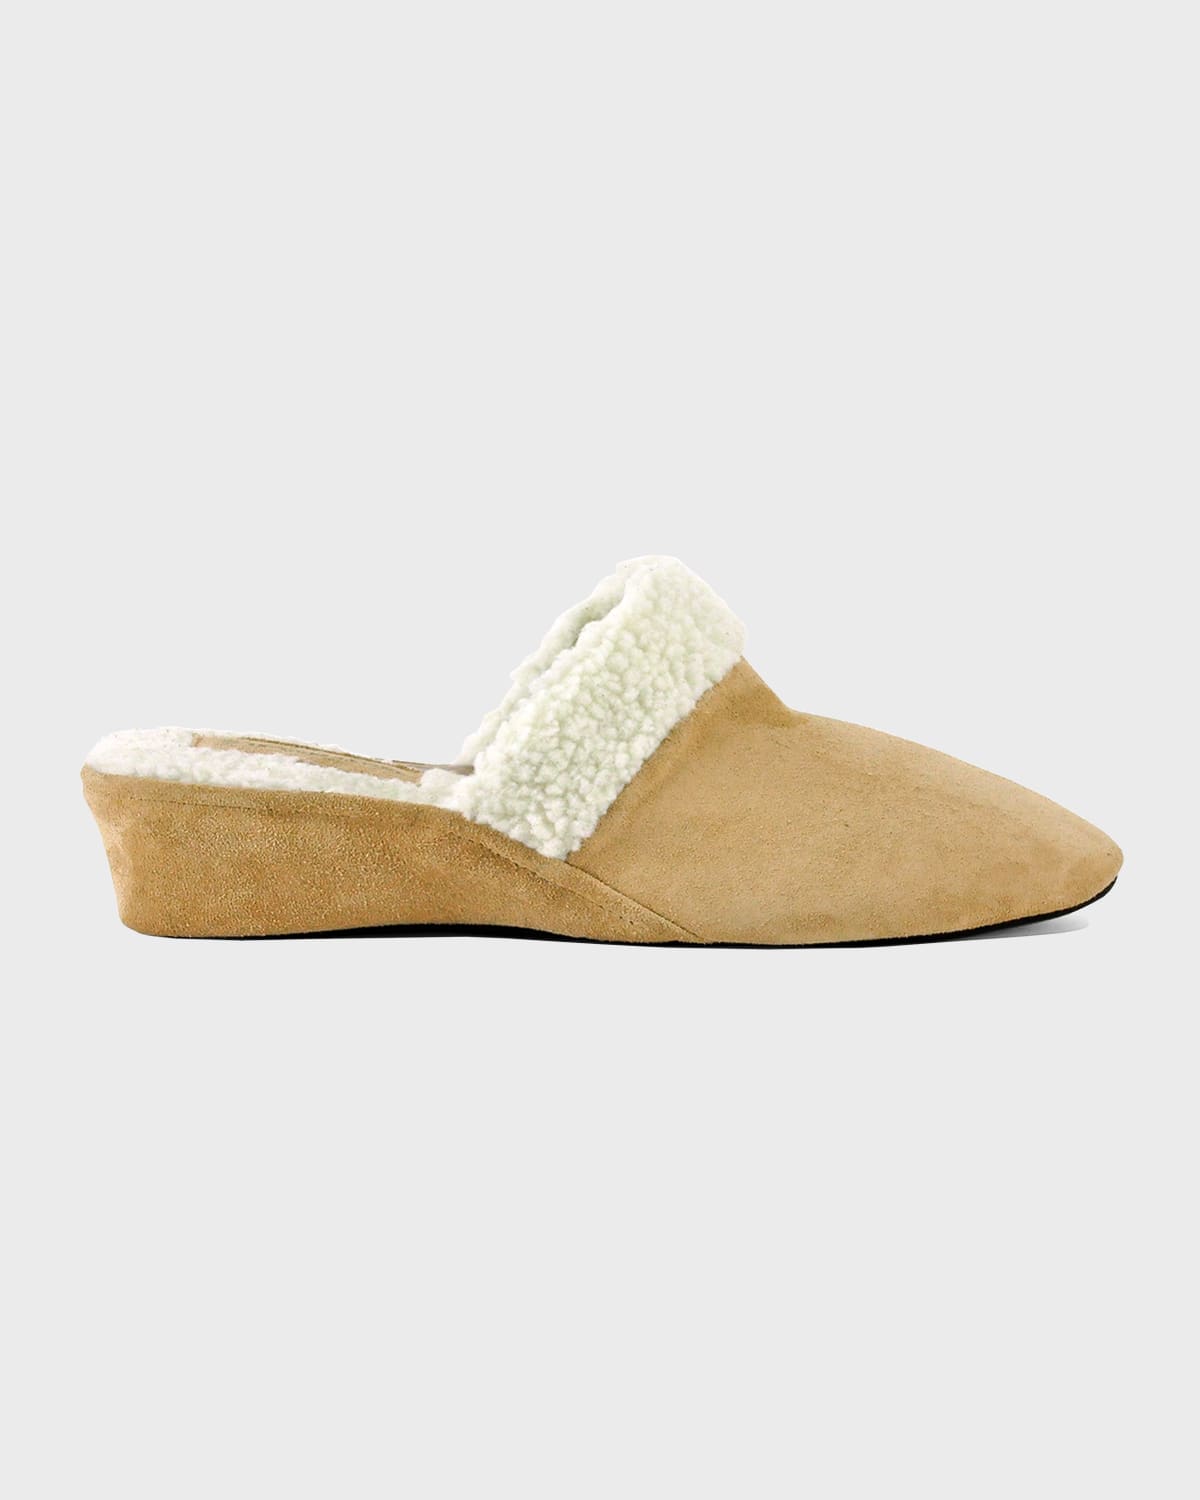 Jacques Levine Suede & Faux Shearling Slippers In Khaki